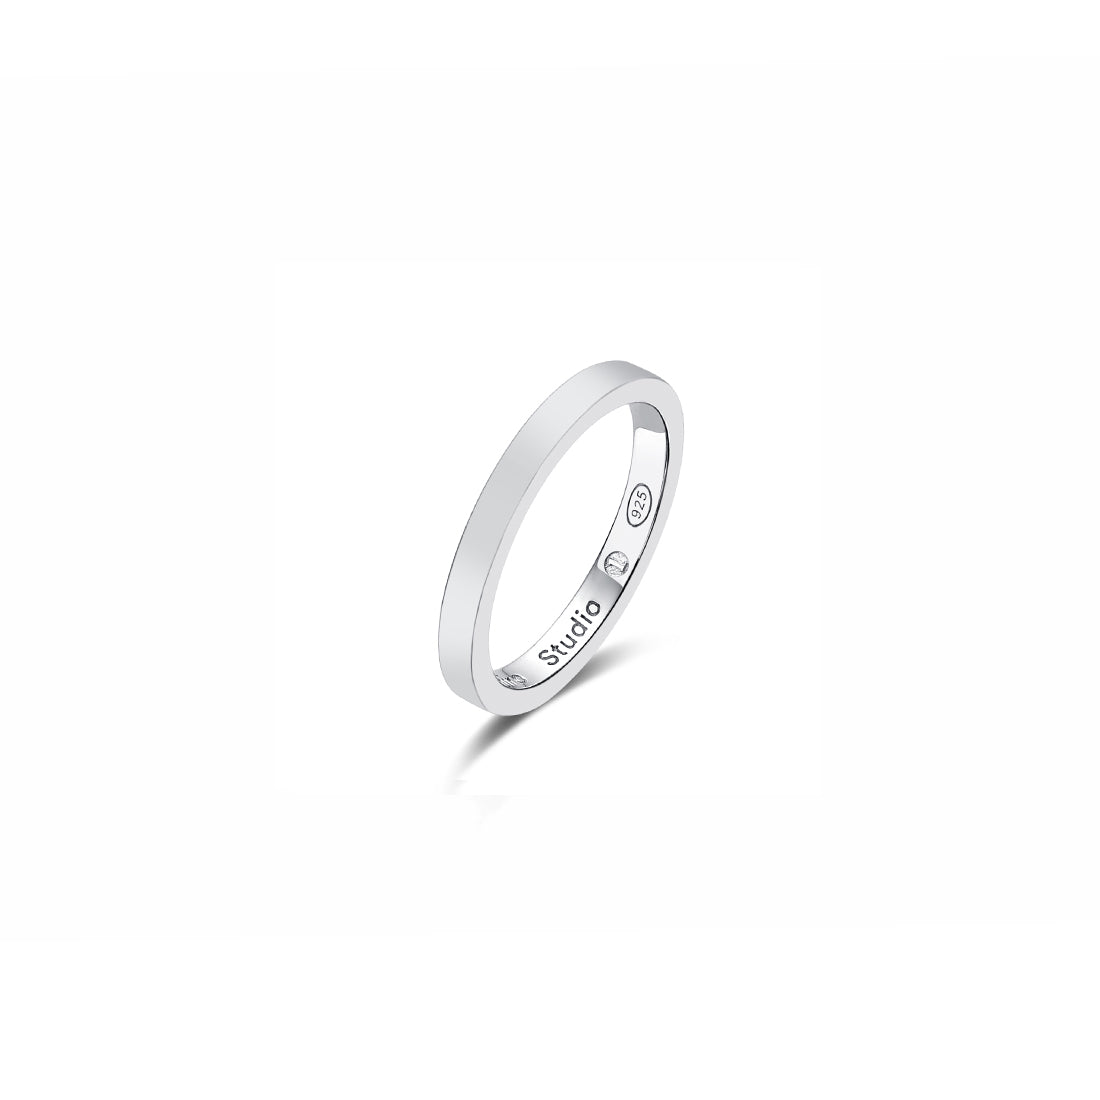 Solo Ring - Sterling Silver